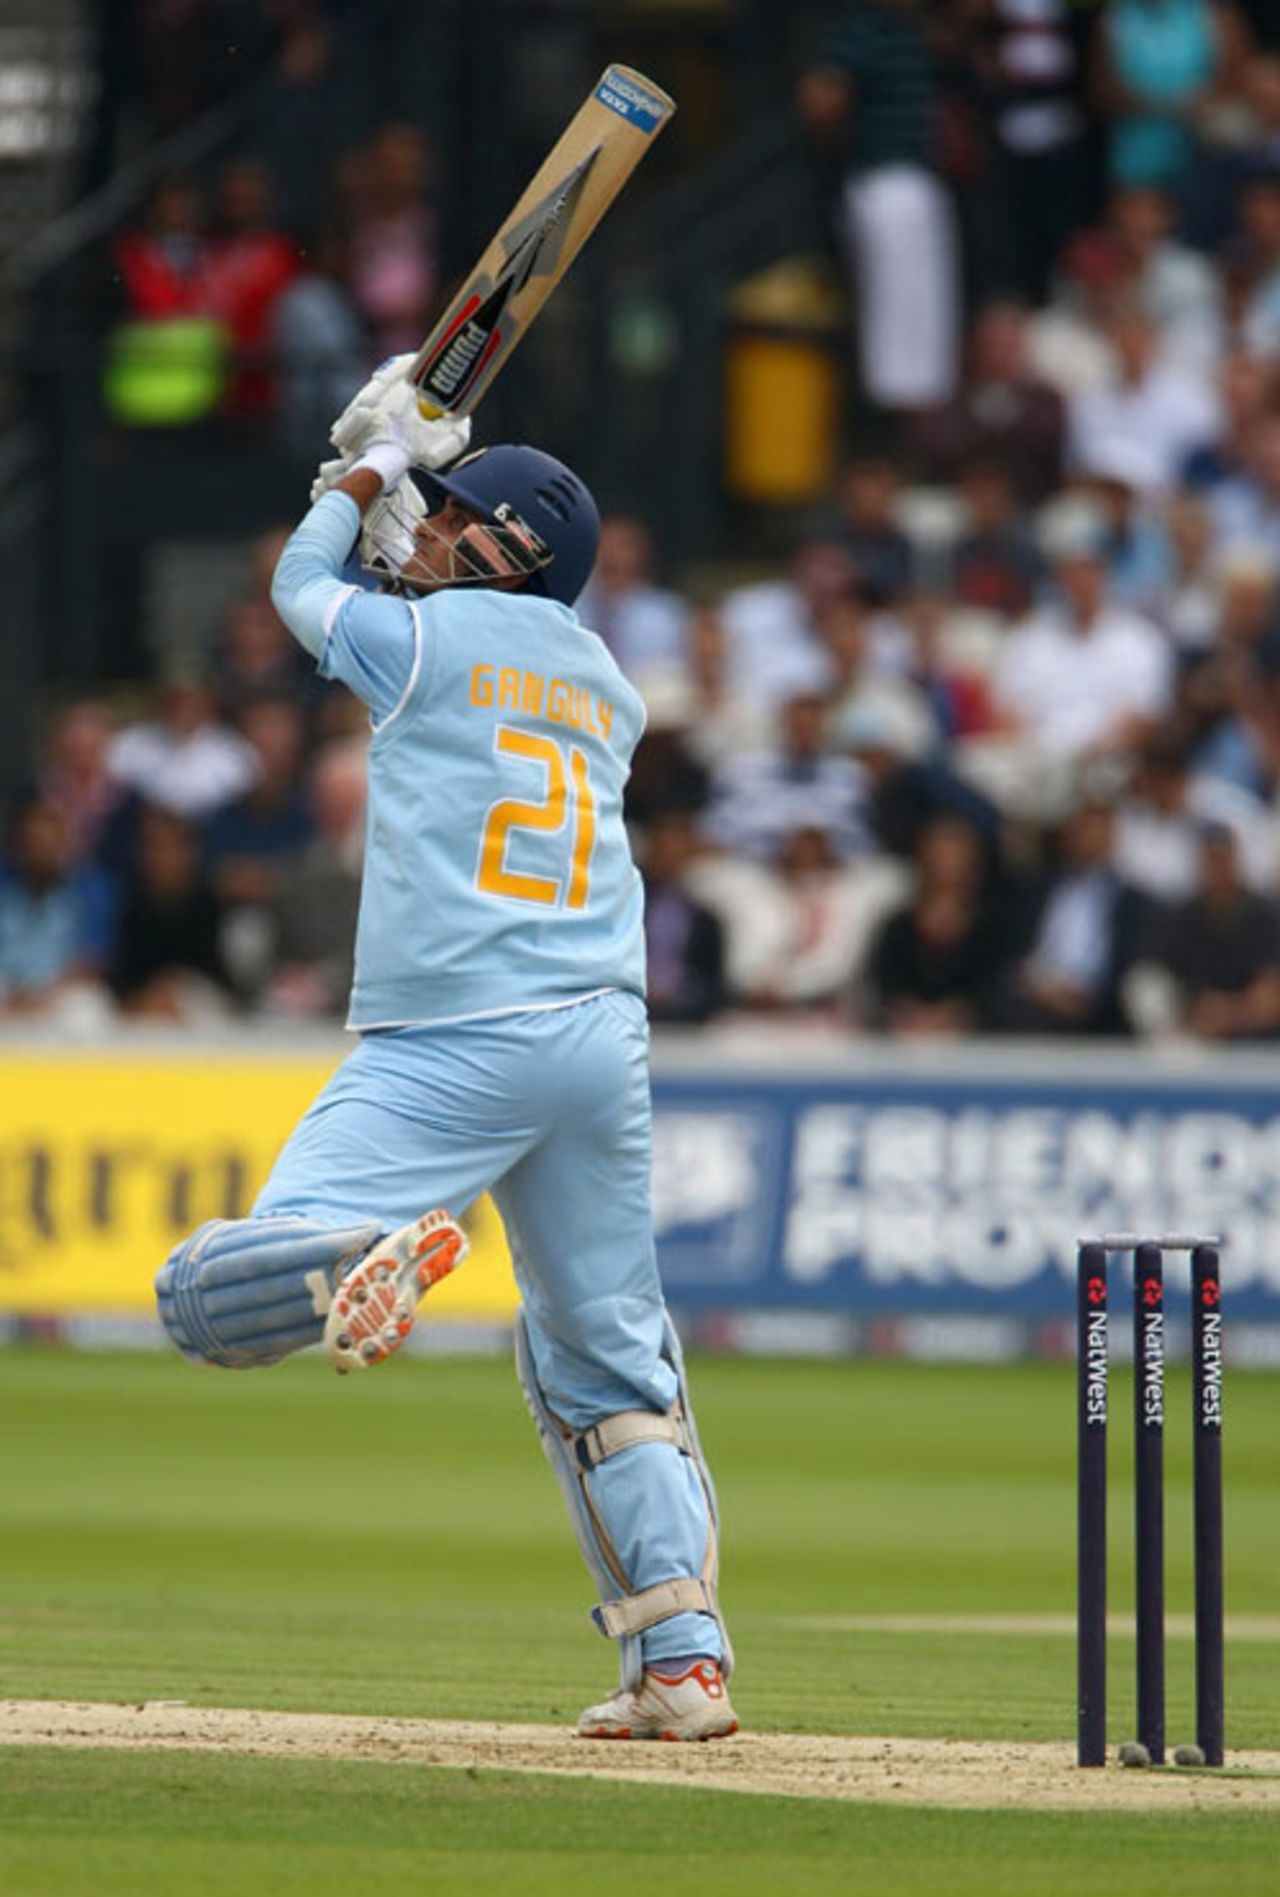 Sourav Ganguly had a torrid time before being dismissed for 15, England v India, 7th ODI, Lord's, September 8, 2007